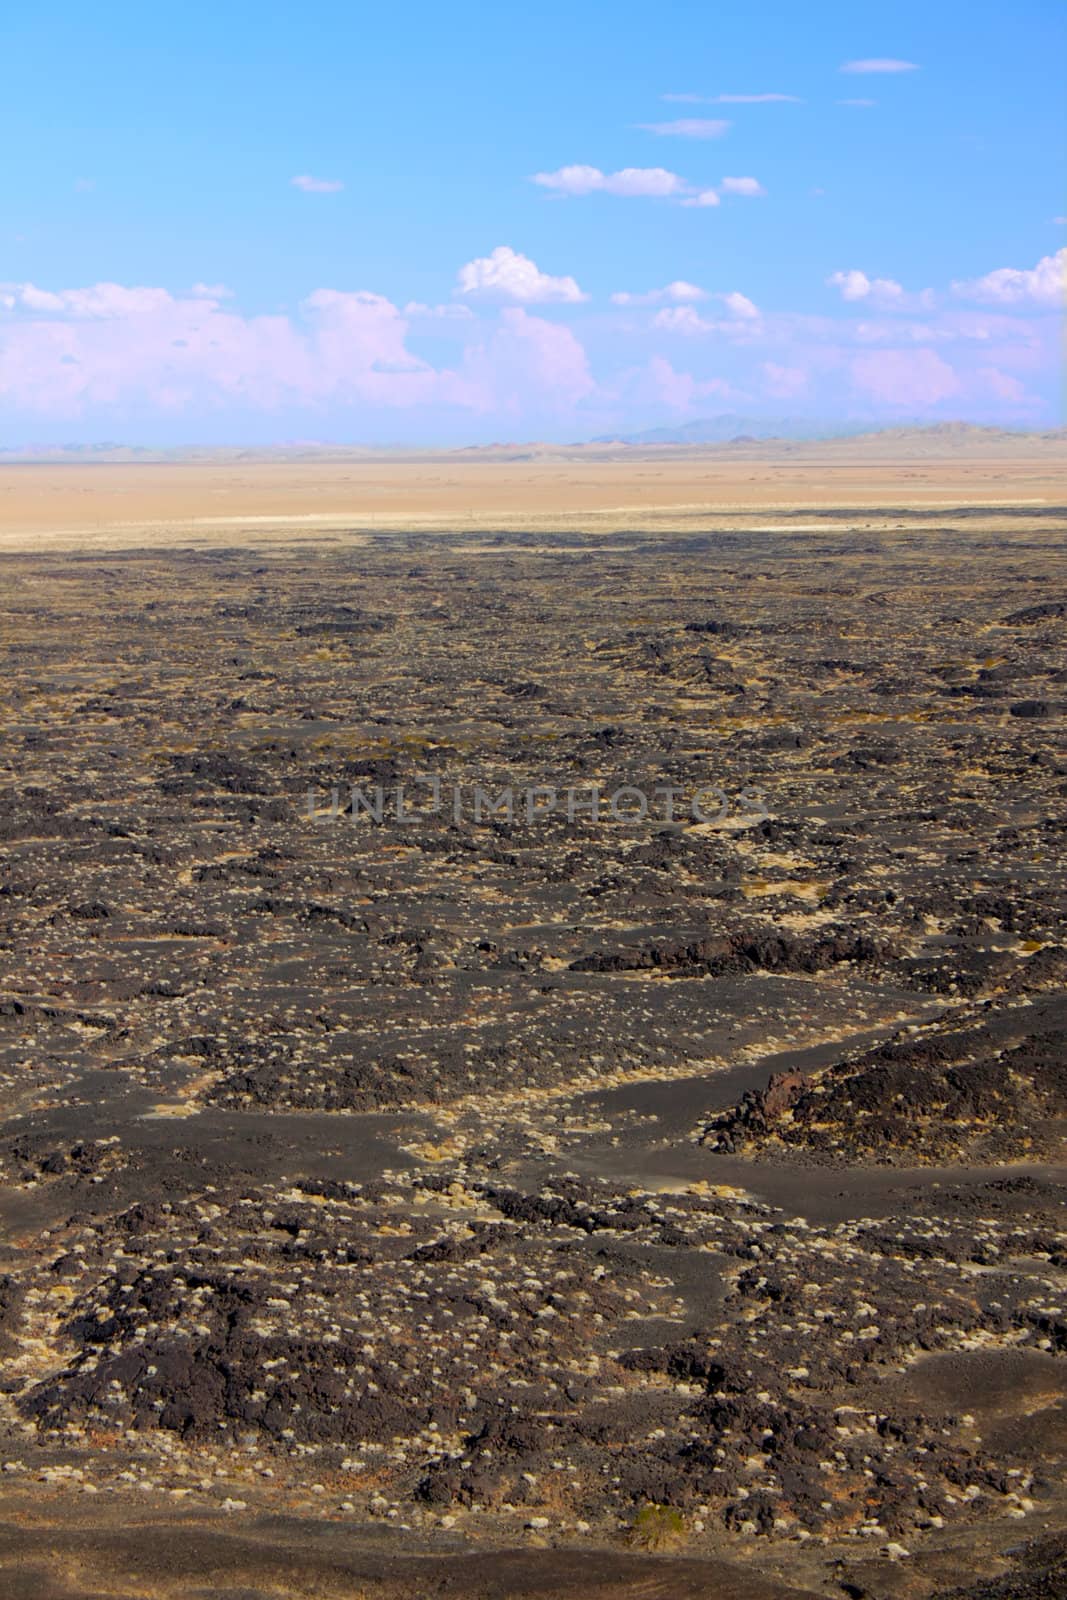 Amboy Crater National Natural Landmark by Wirepec